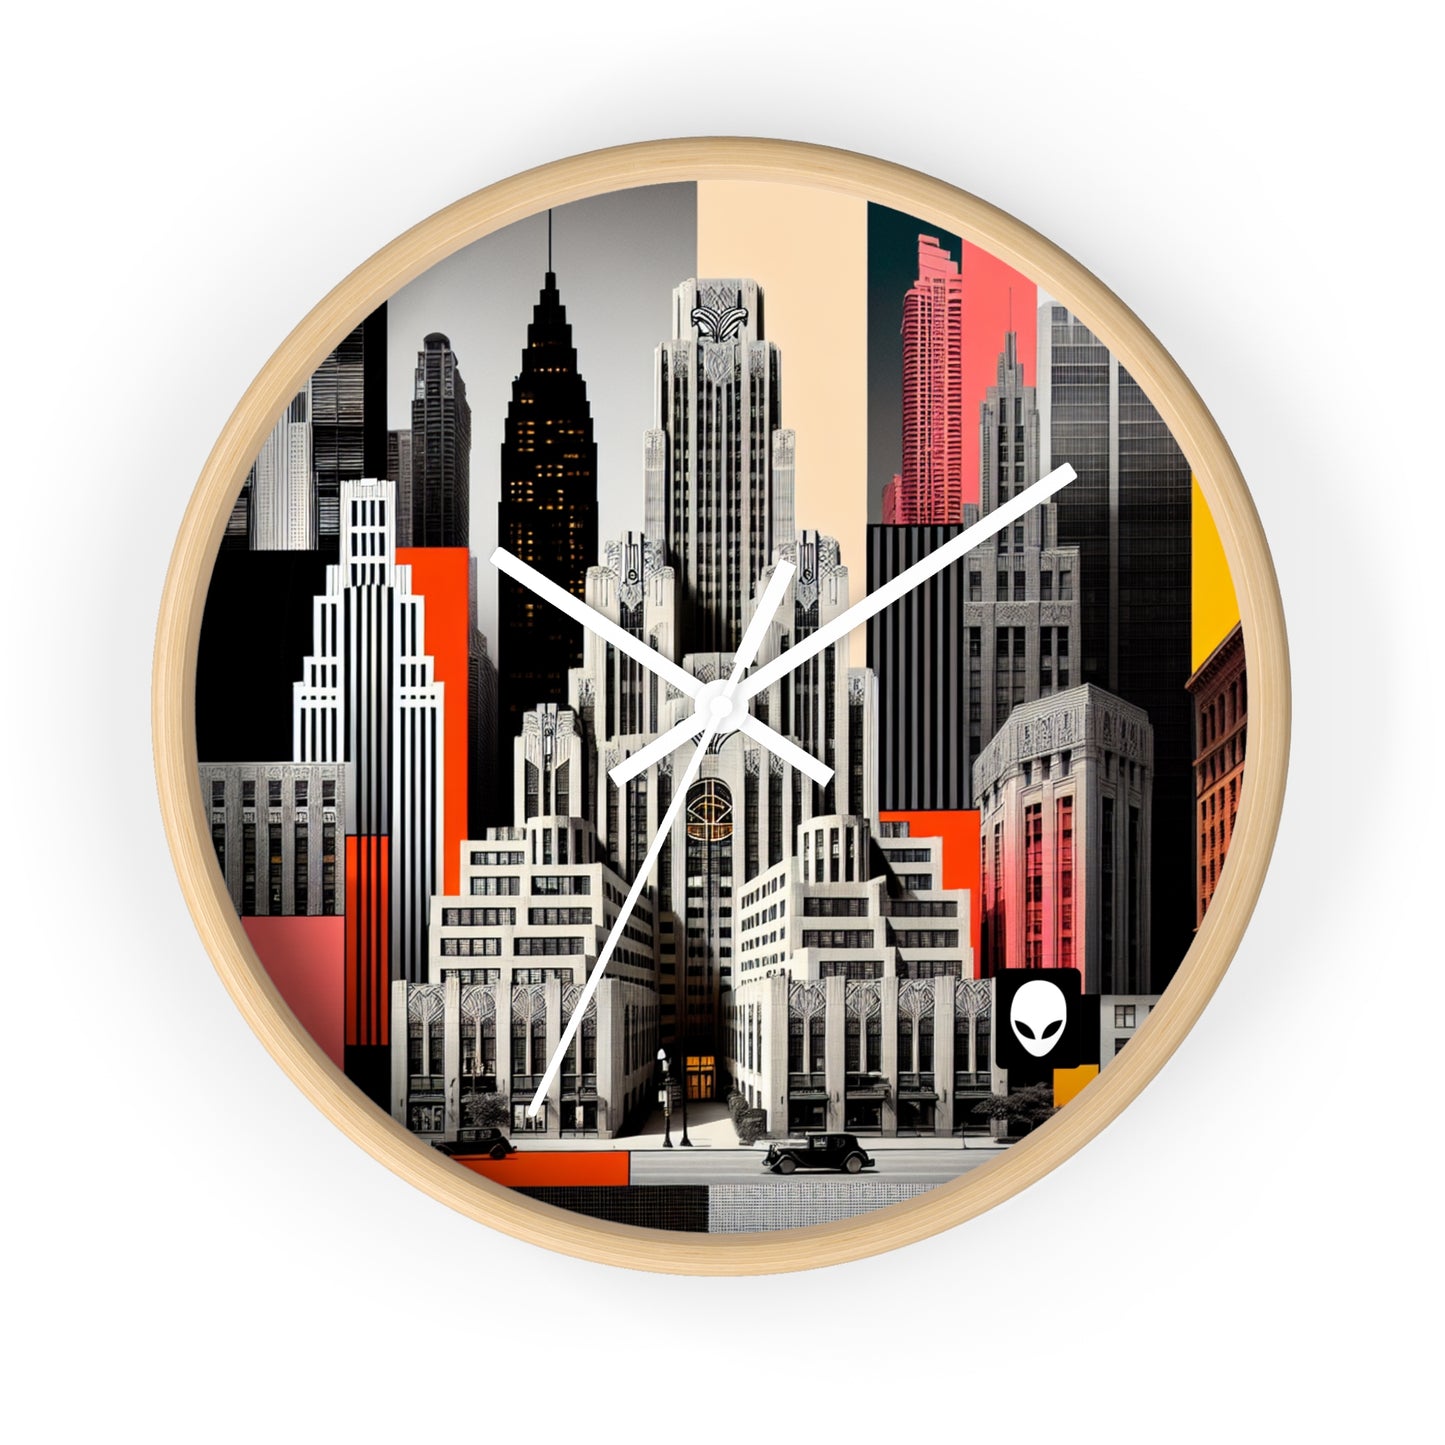 "A Contrast of Times: Classic Art Deco Skyscrapers and a Modern Cityscape" - The Alien Wall Clock Art Deco Style